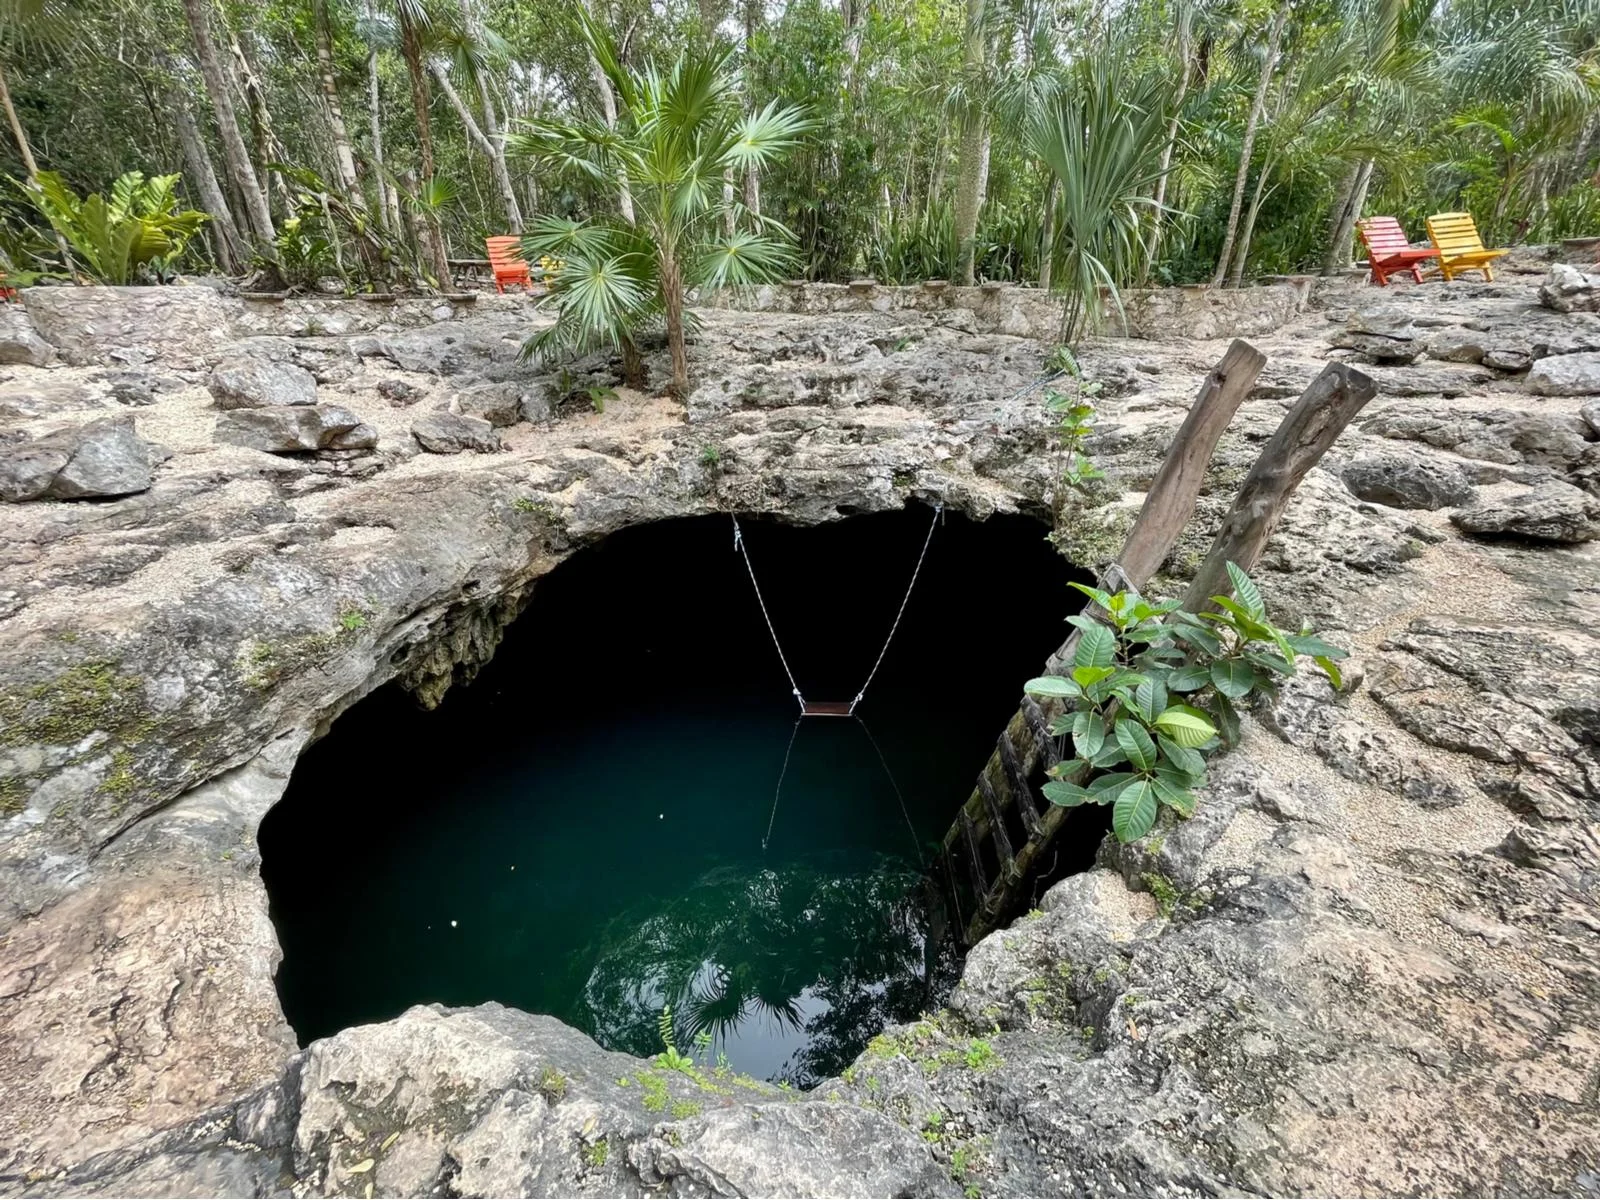 Cenote Calavera, one of the best cenotes in Mexico, pictured at the entrance with a ladder going into the water